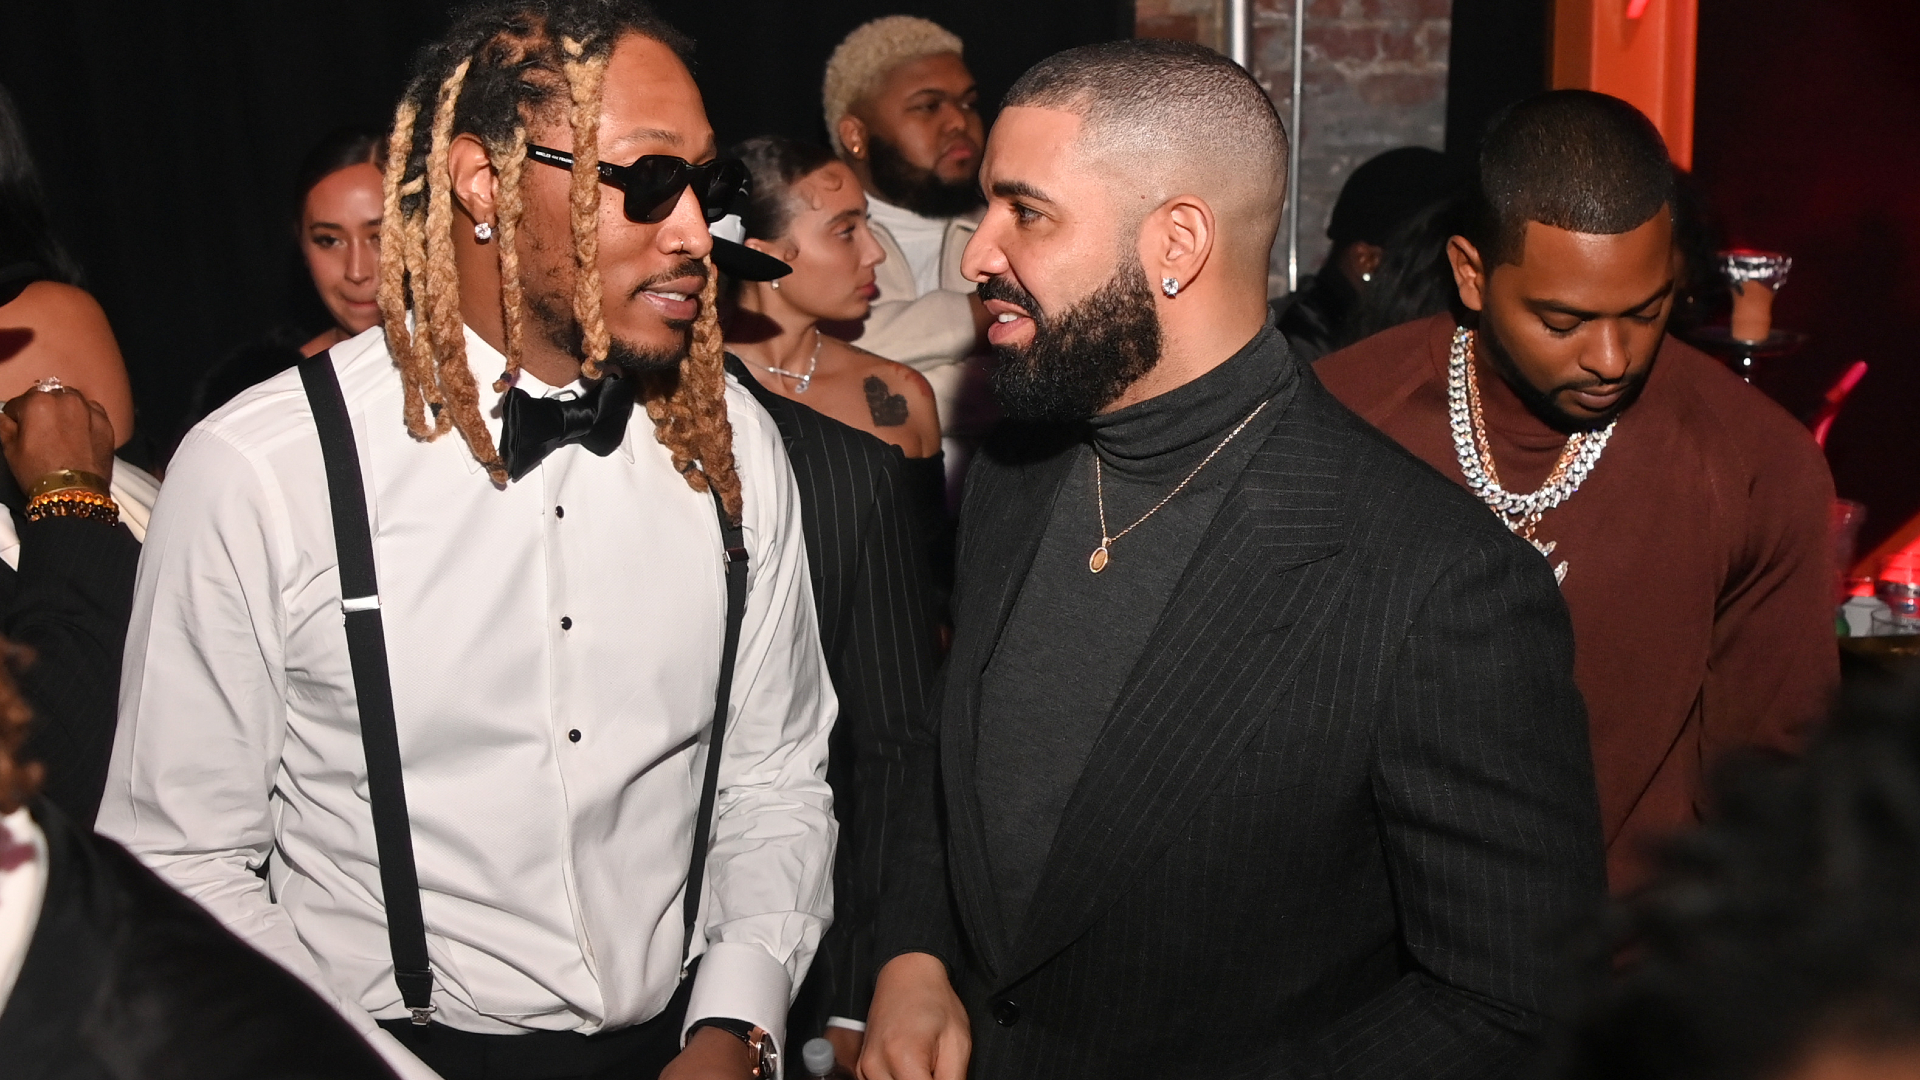 Future and Drake are pictured at an event